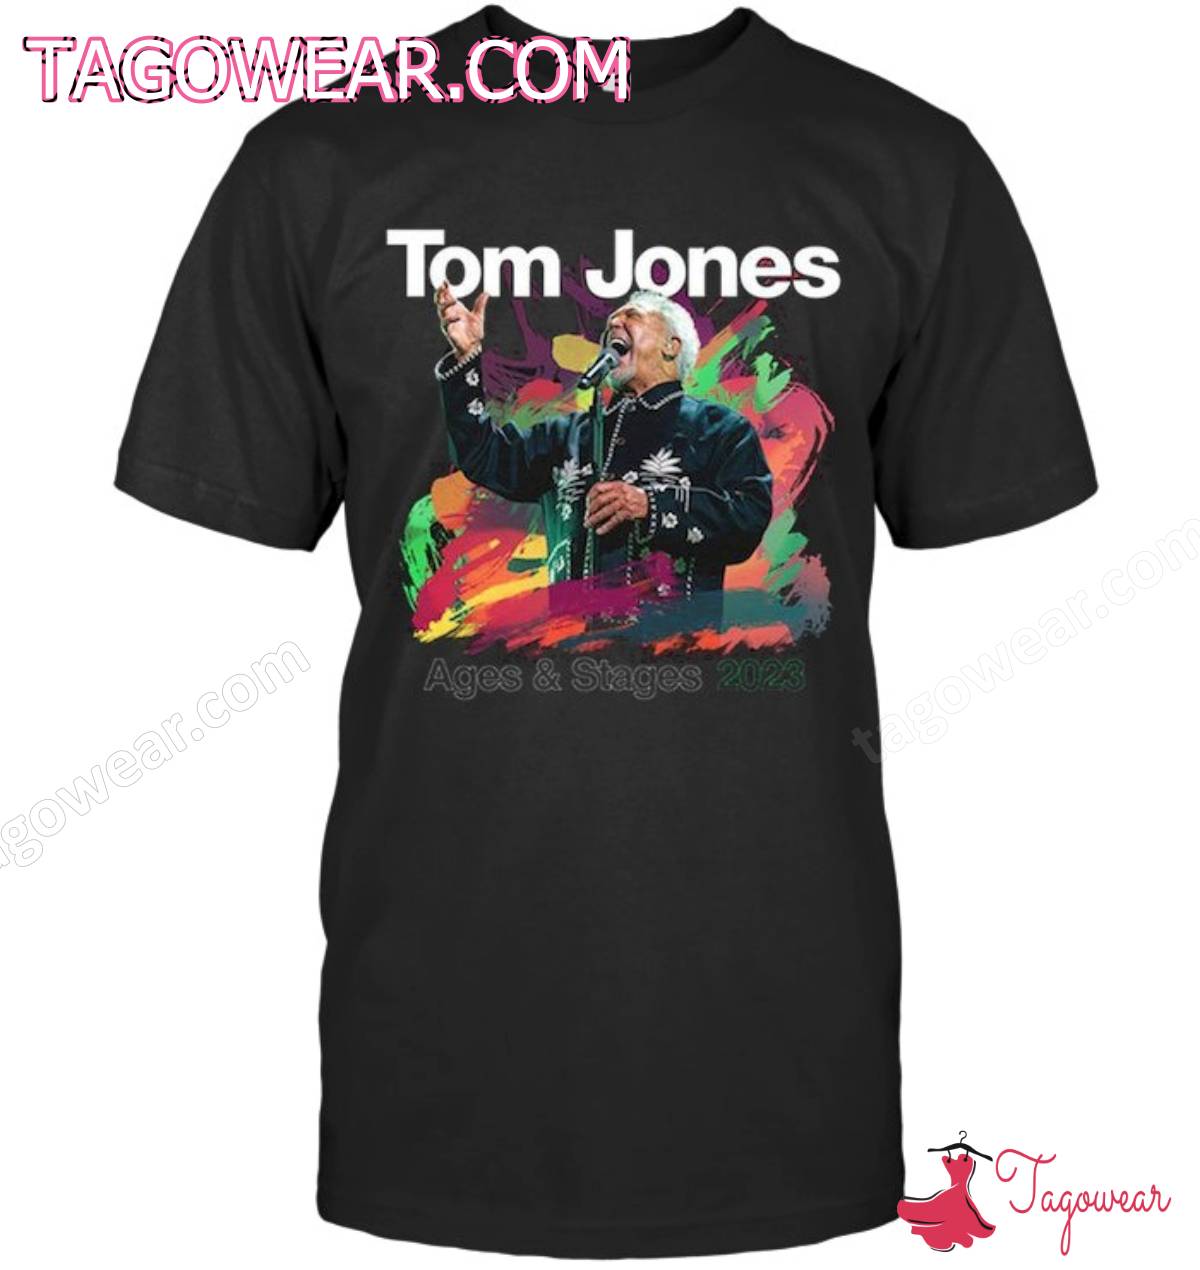 Tom Jones Ages And Stages 2023 Tour Shirt